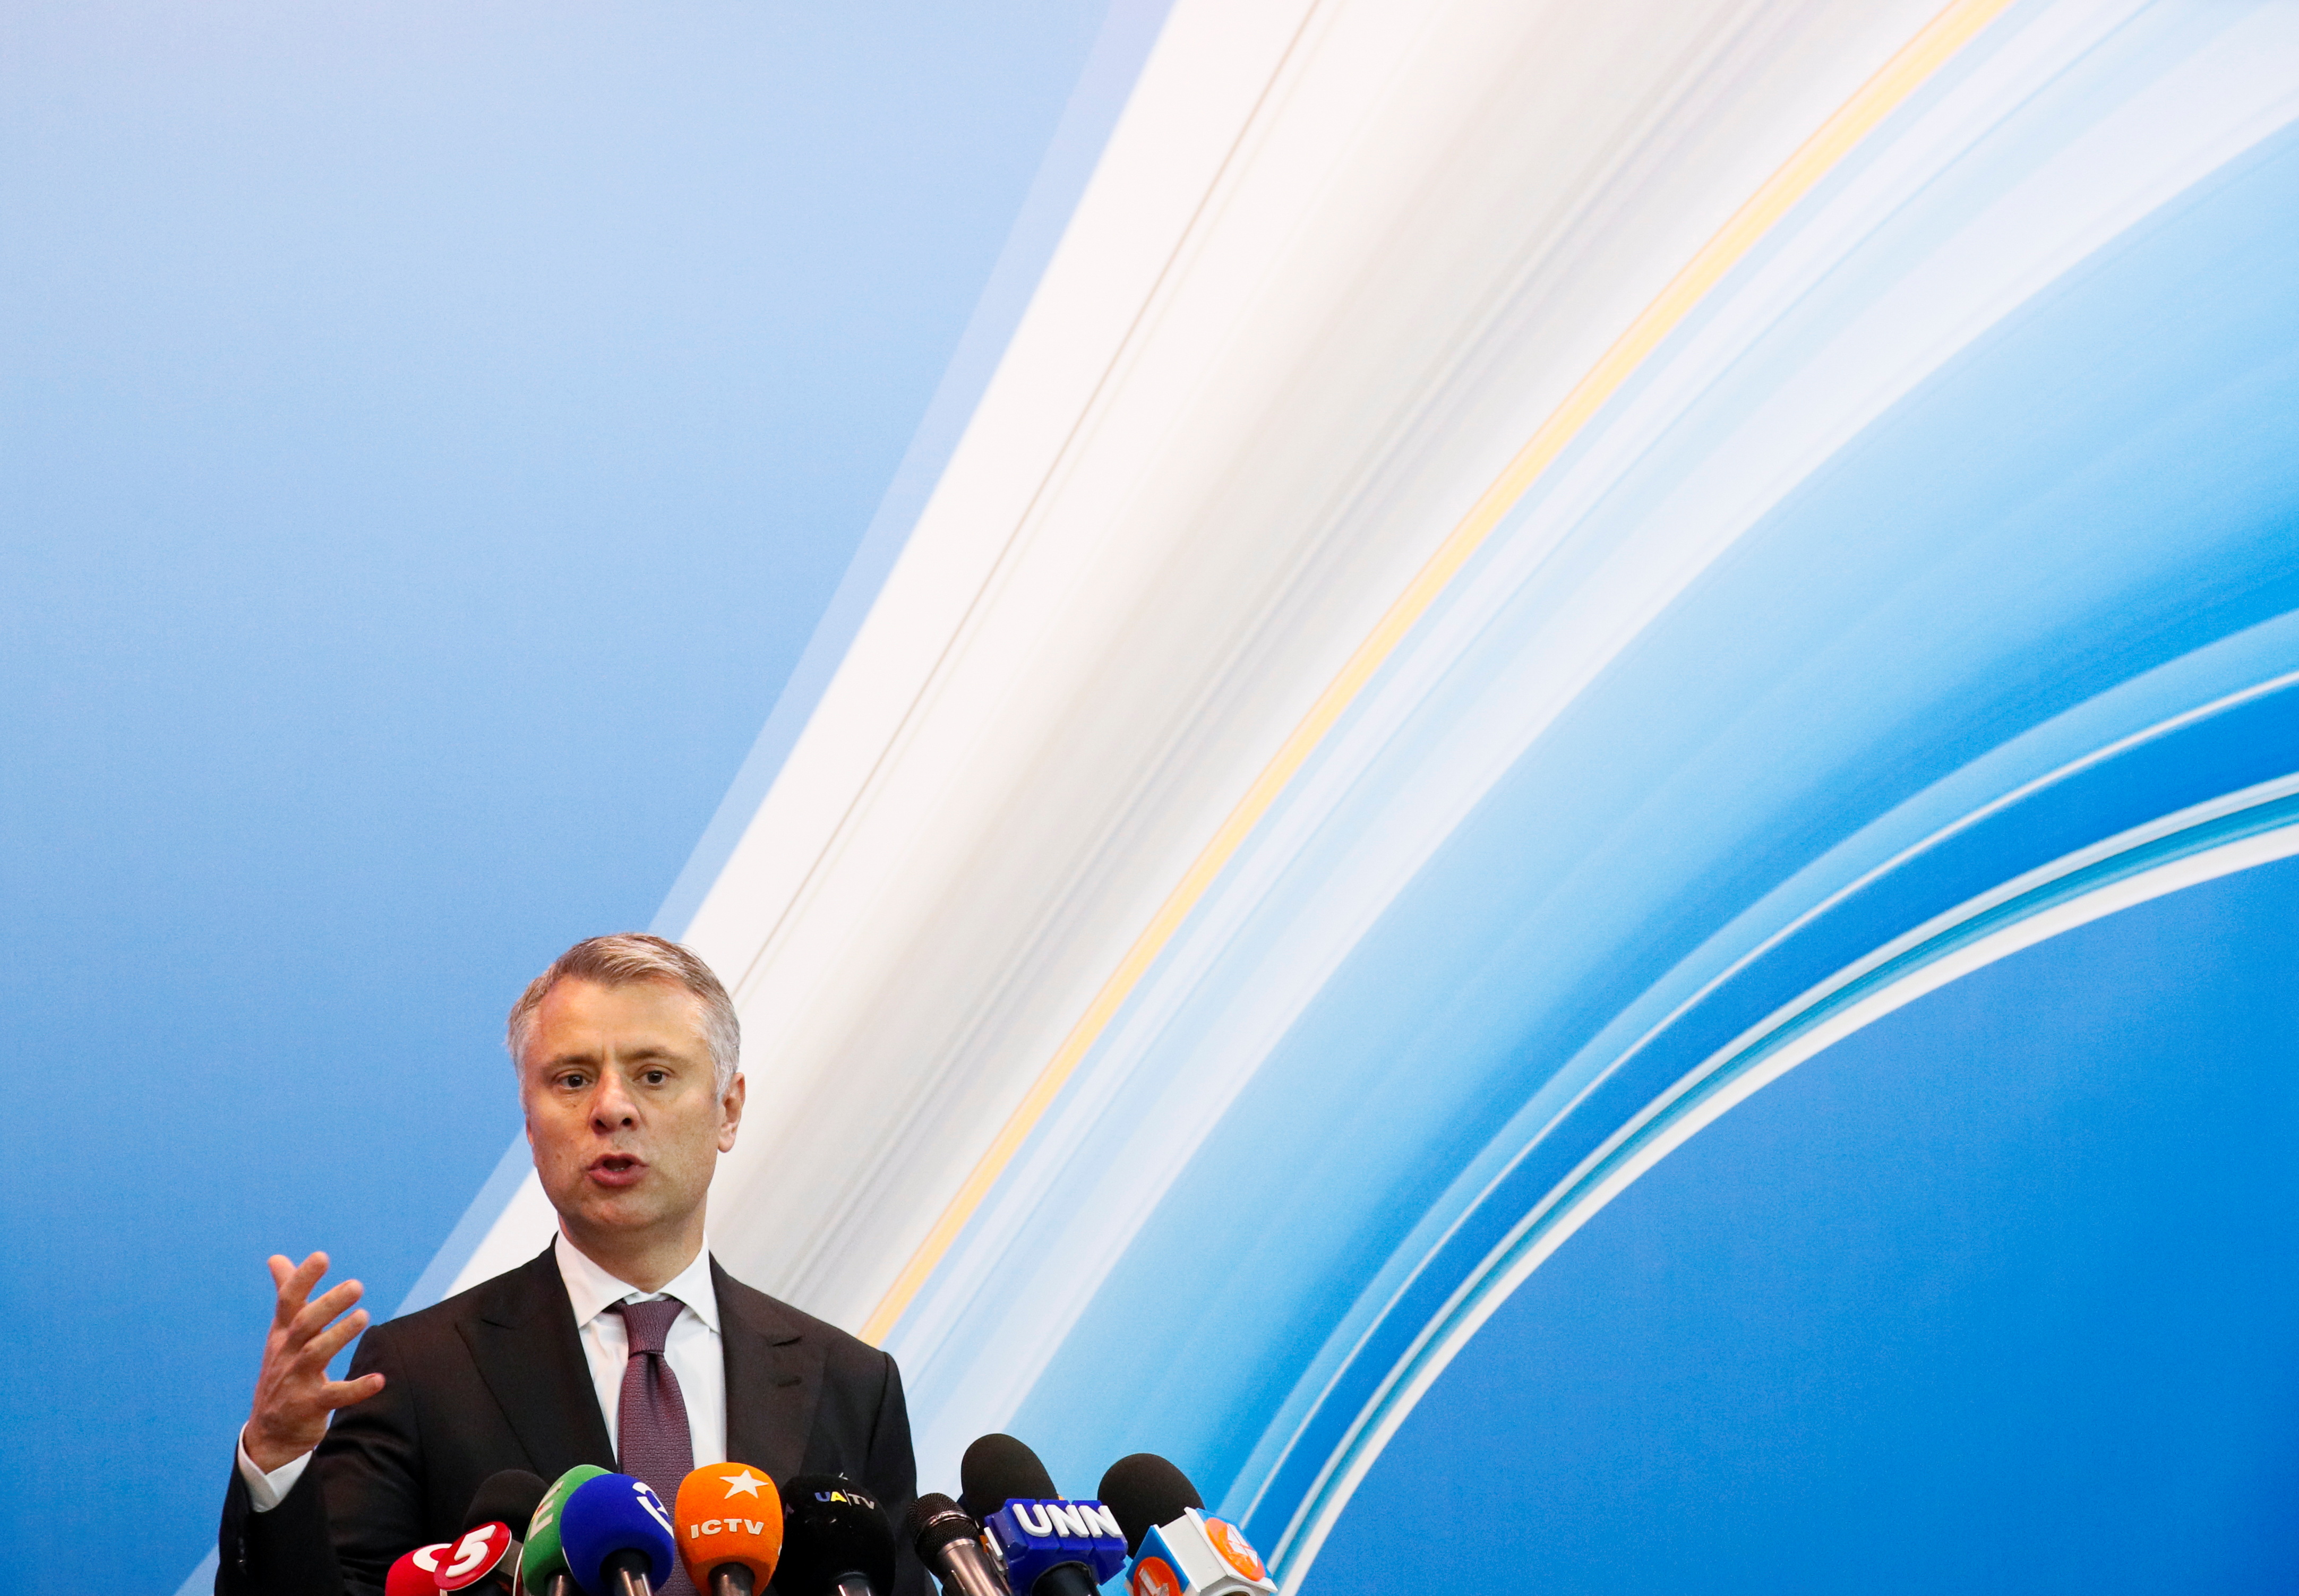 The head of Ukraine's state energy company Naftogaz Vitrenko addresses the media during a news conference in Kyiv